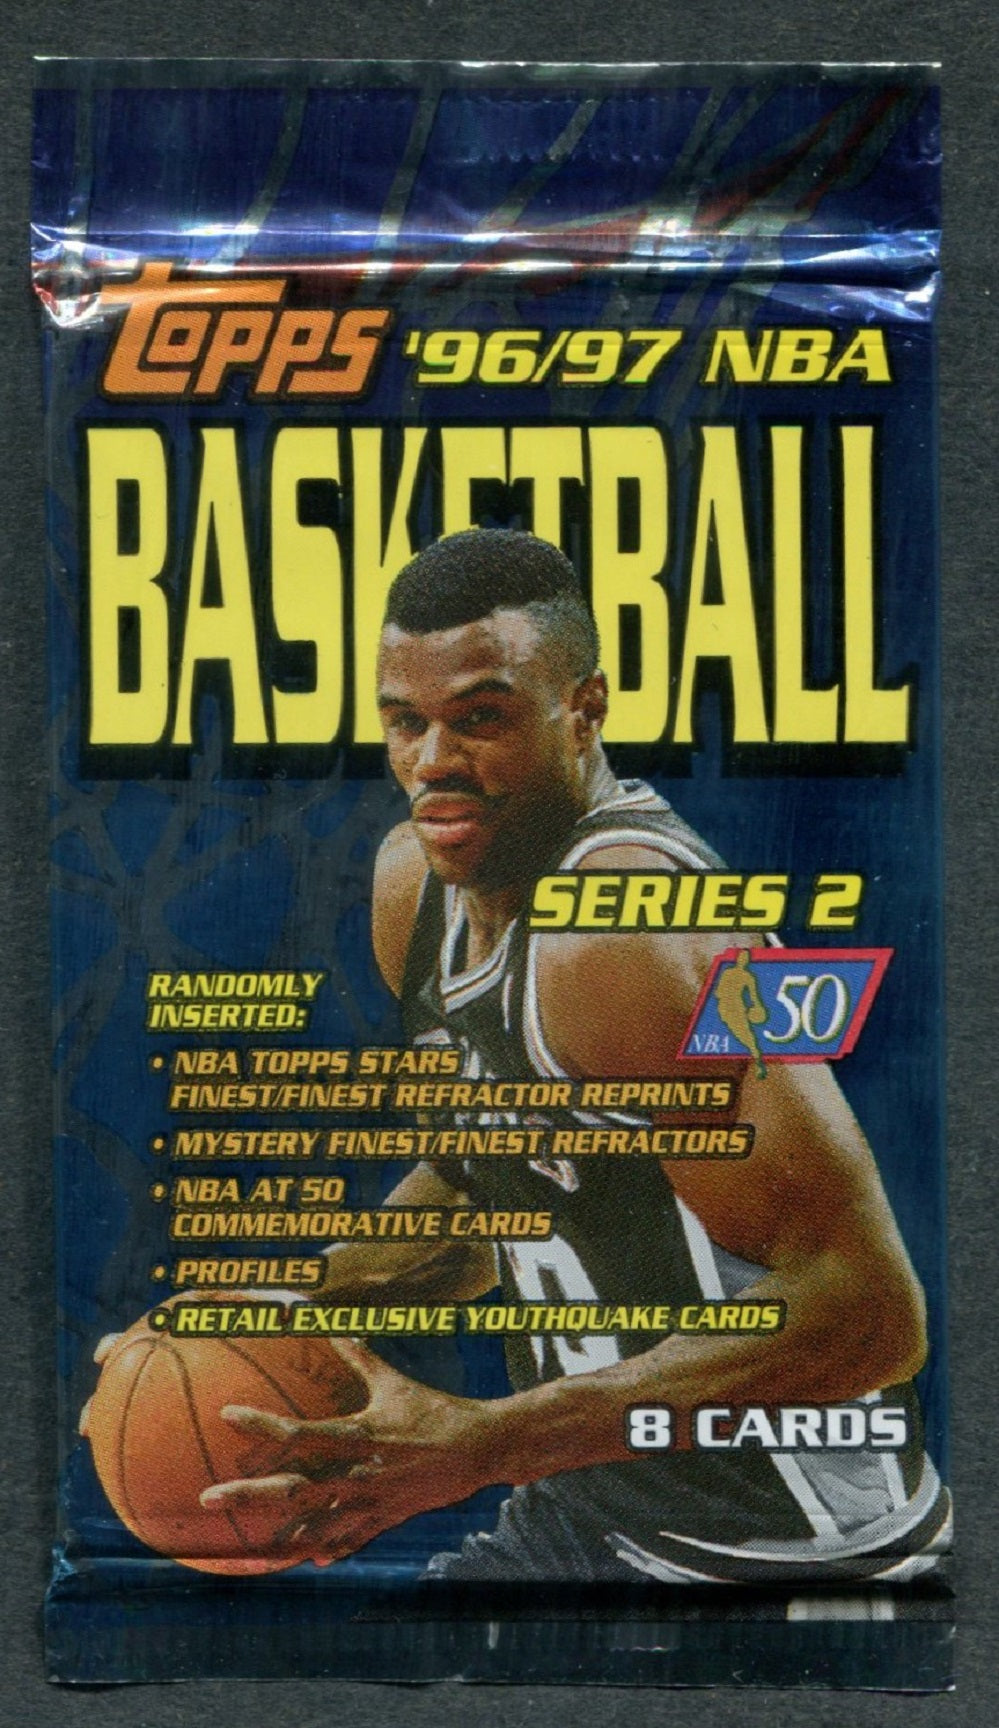 1996/97 Topps Basketball Unopened Series 2 Pack (Retail) (8 Cards)